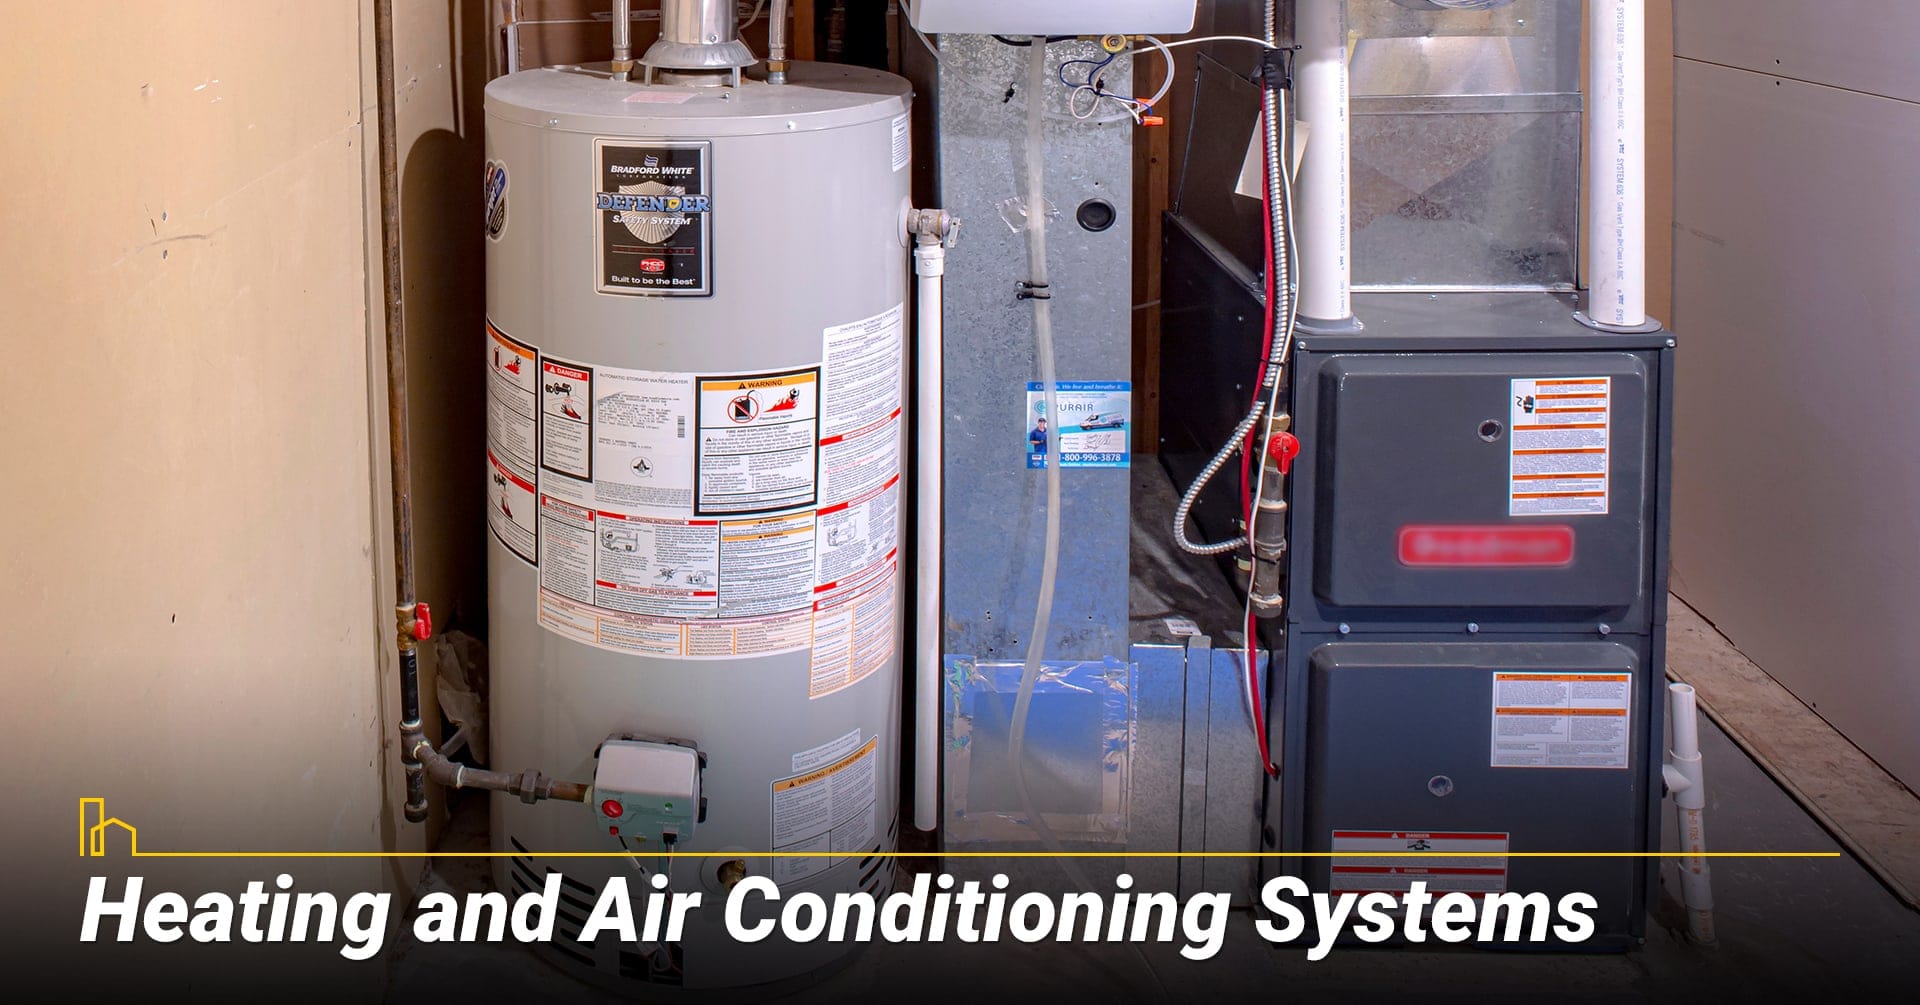 Heating and Air Conditioning Systems, make sure your heating and AC systems work properly